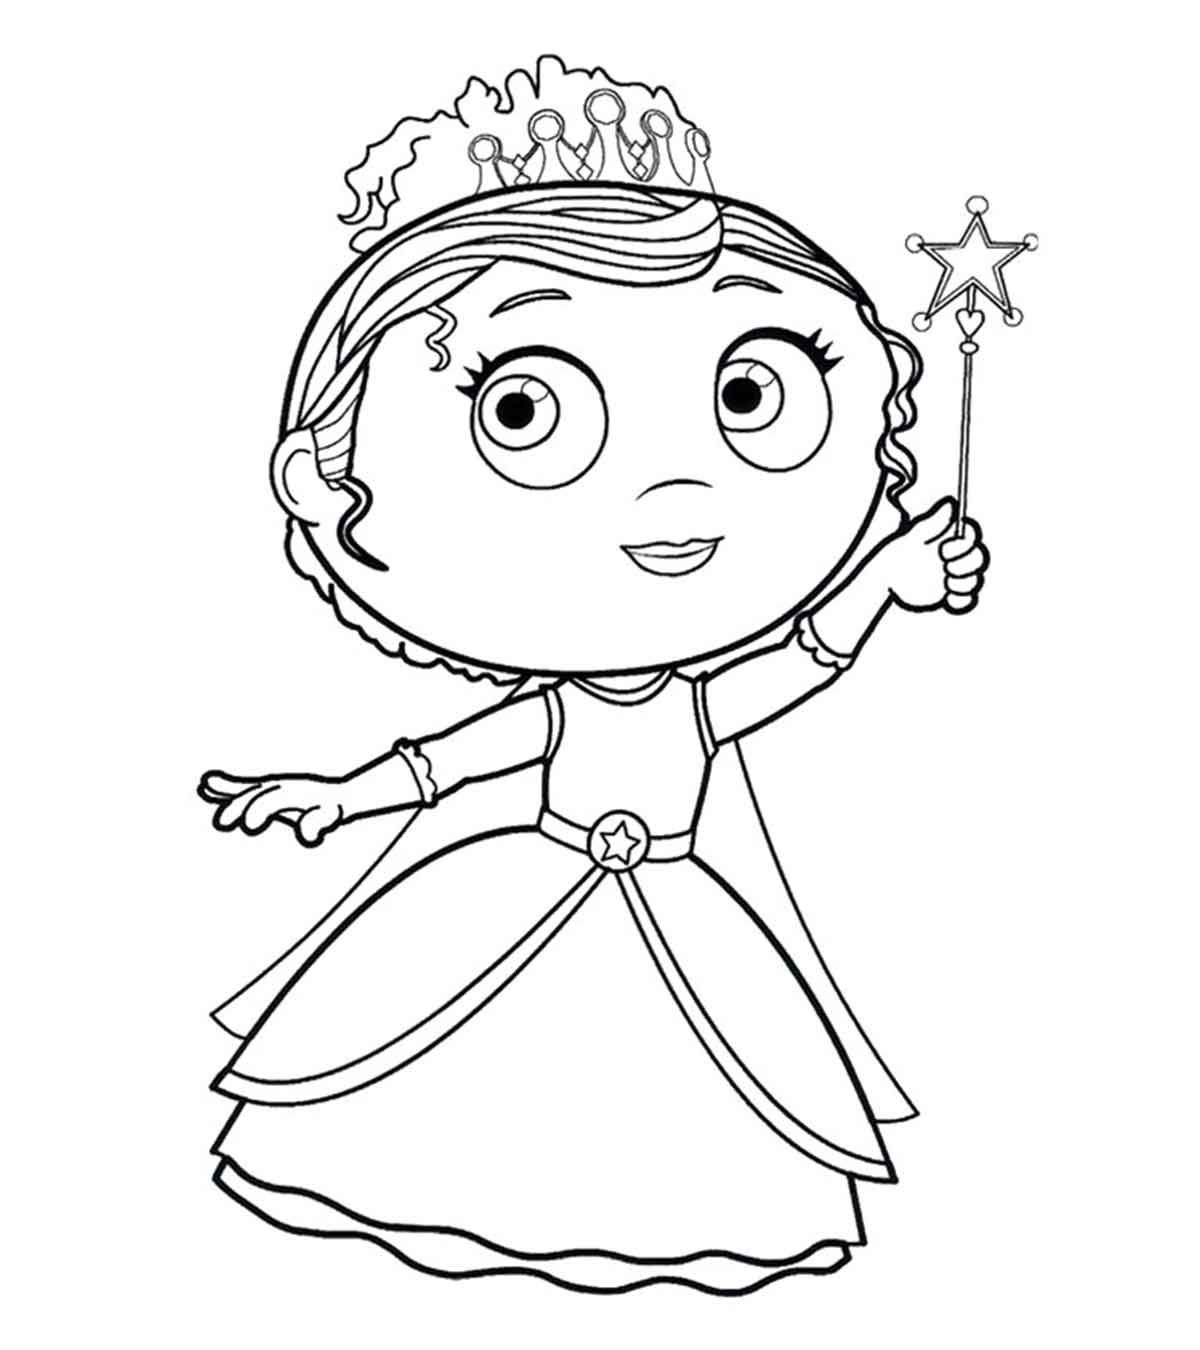 Top 10 ‘Super Why’ Coloring Pages For Your Toddler_image